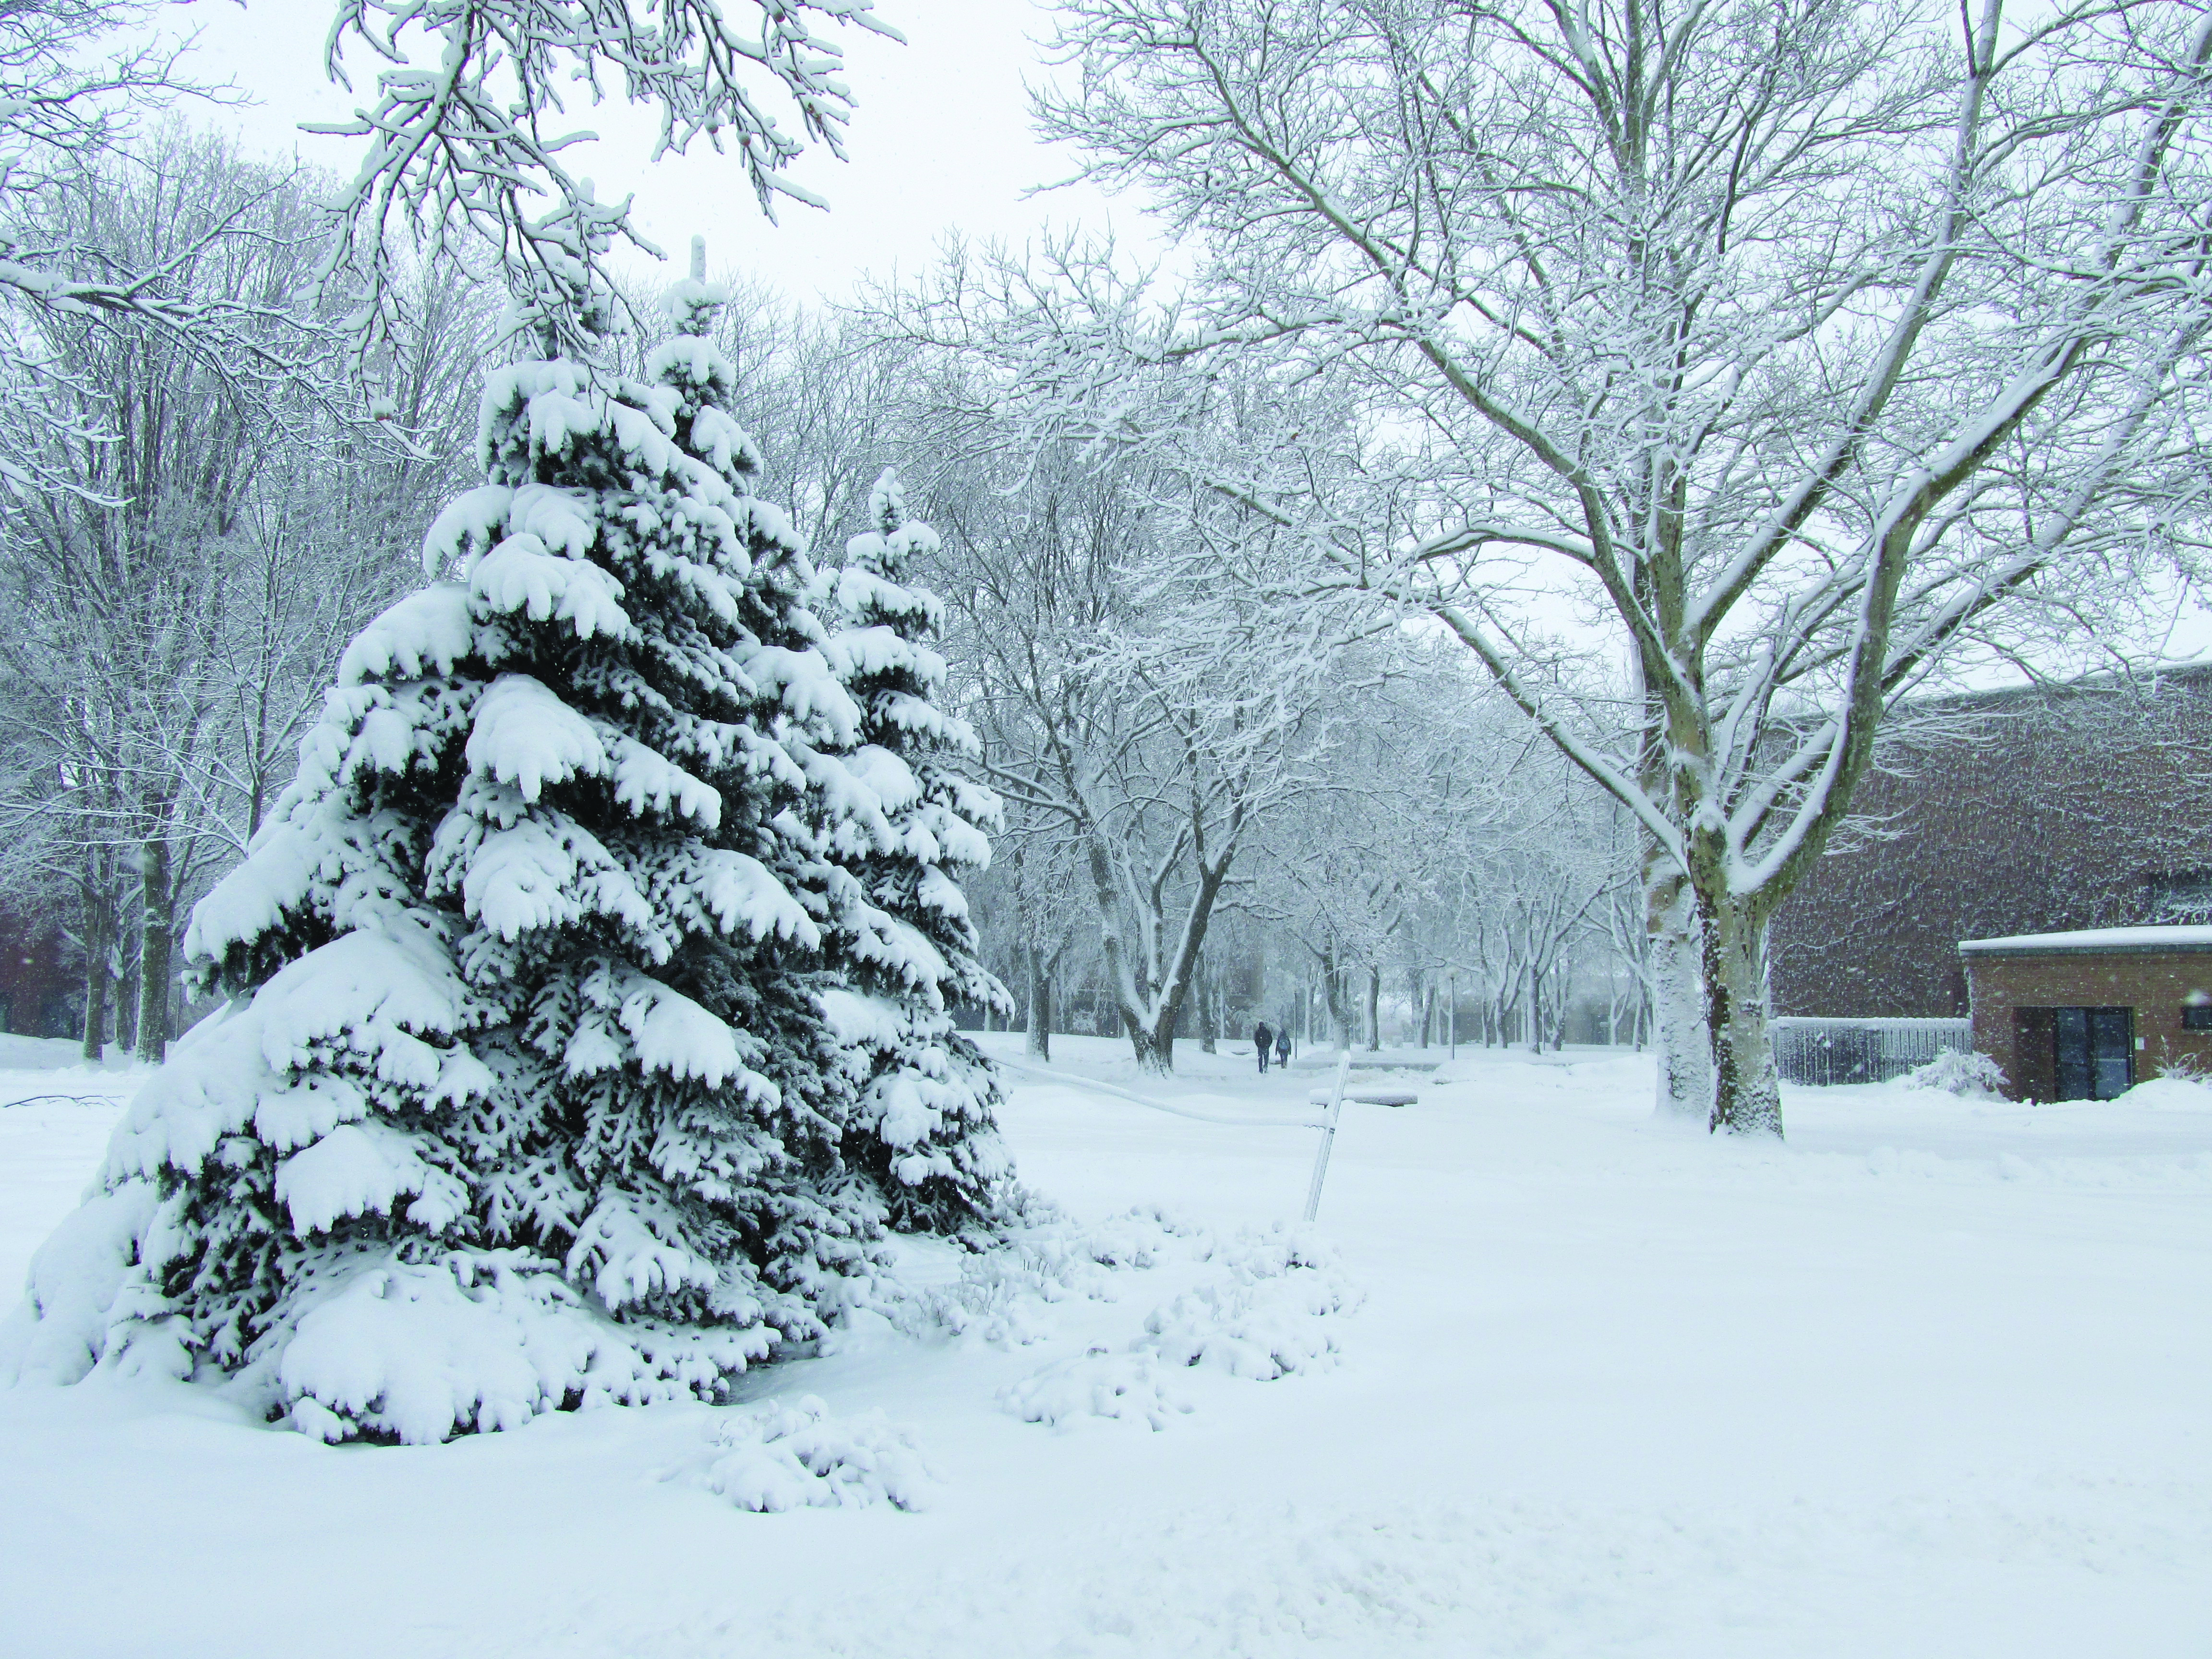 Snow covers evergreen trees along with the rest of campus after a storm